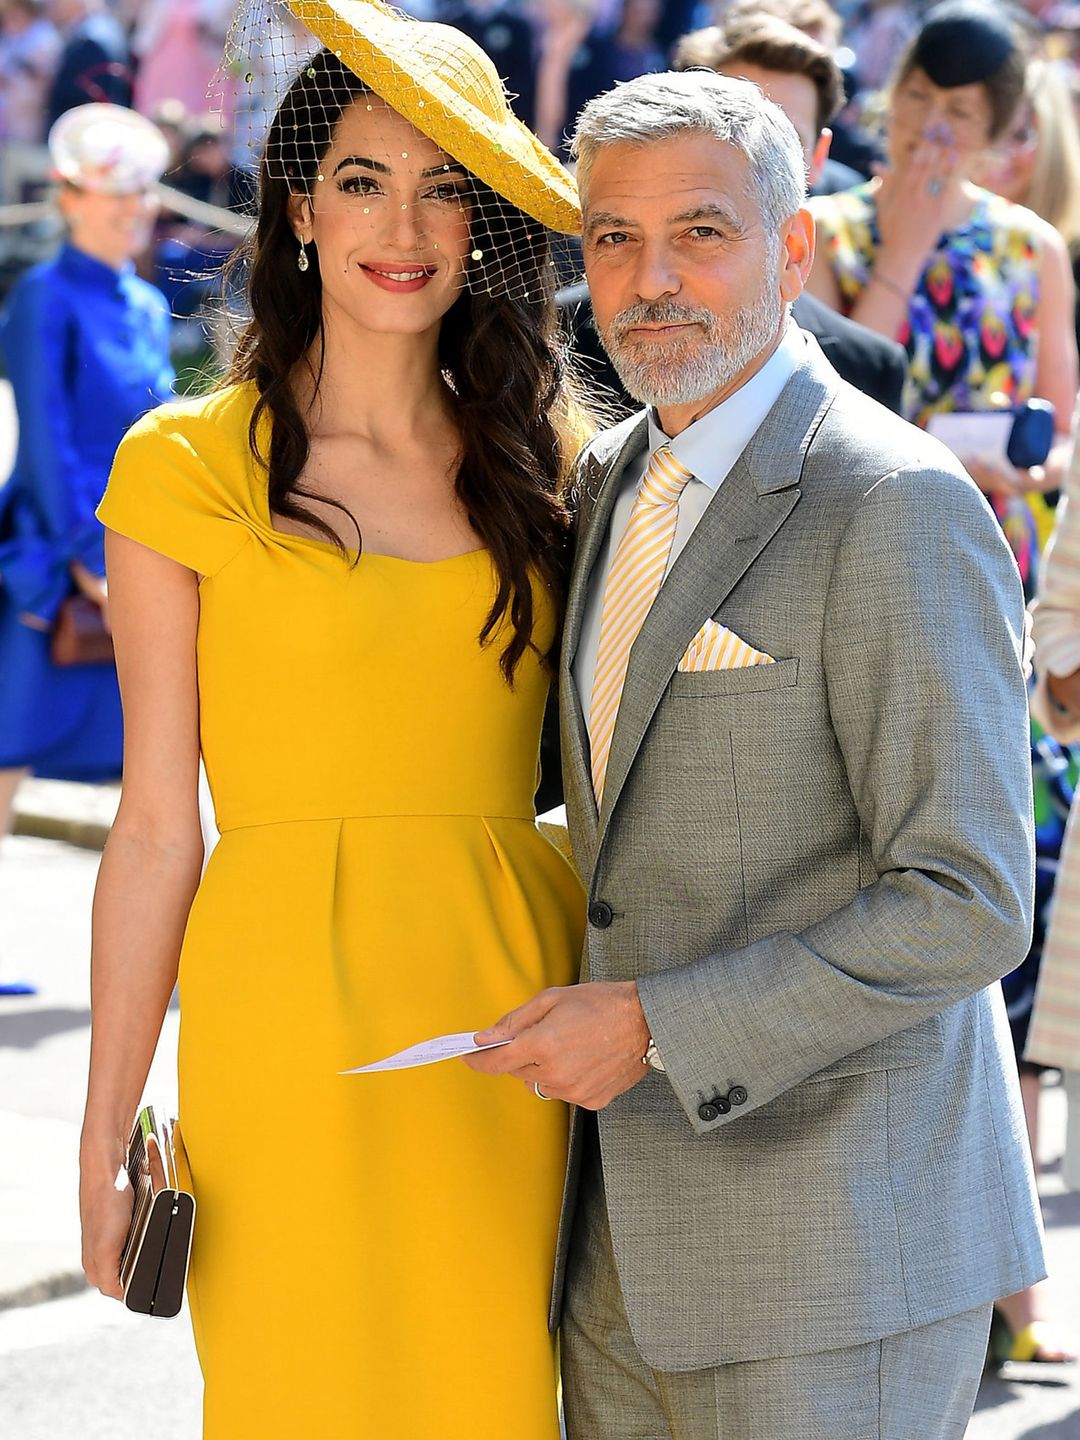 Amal and George Clooney at the wedding Prince Harry and Meghan Markle in 2018